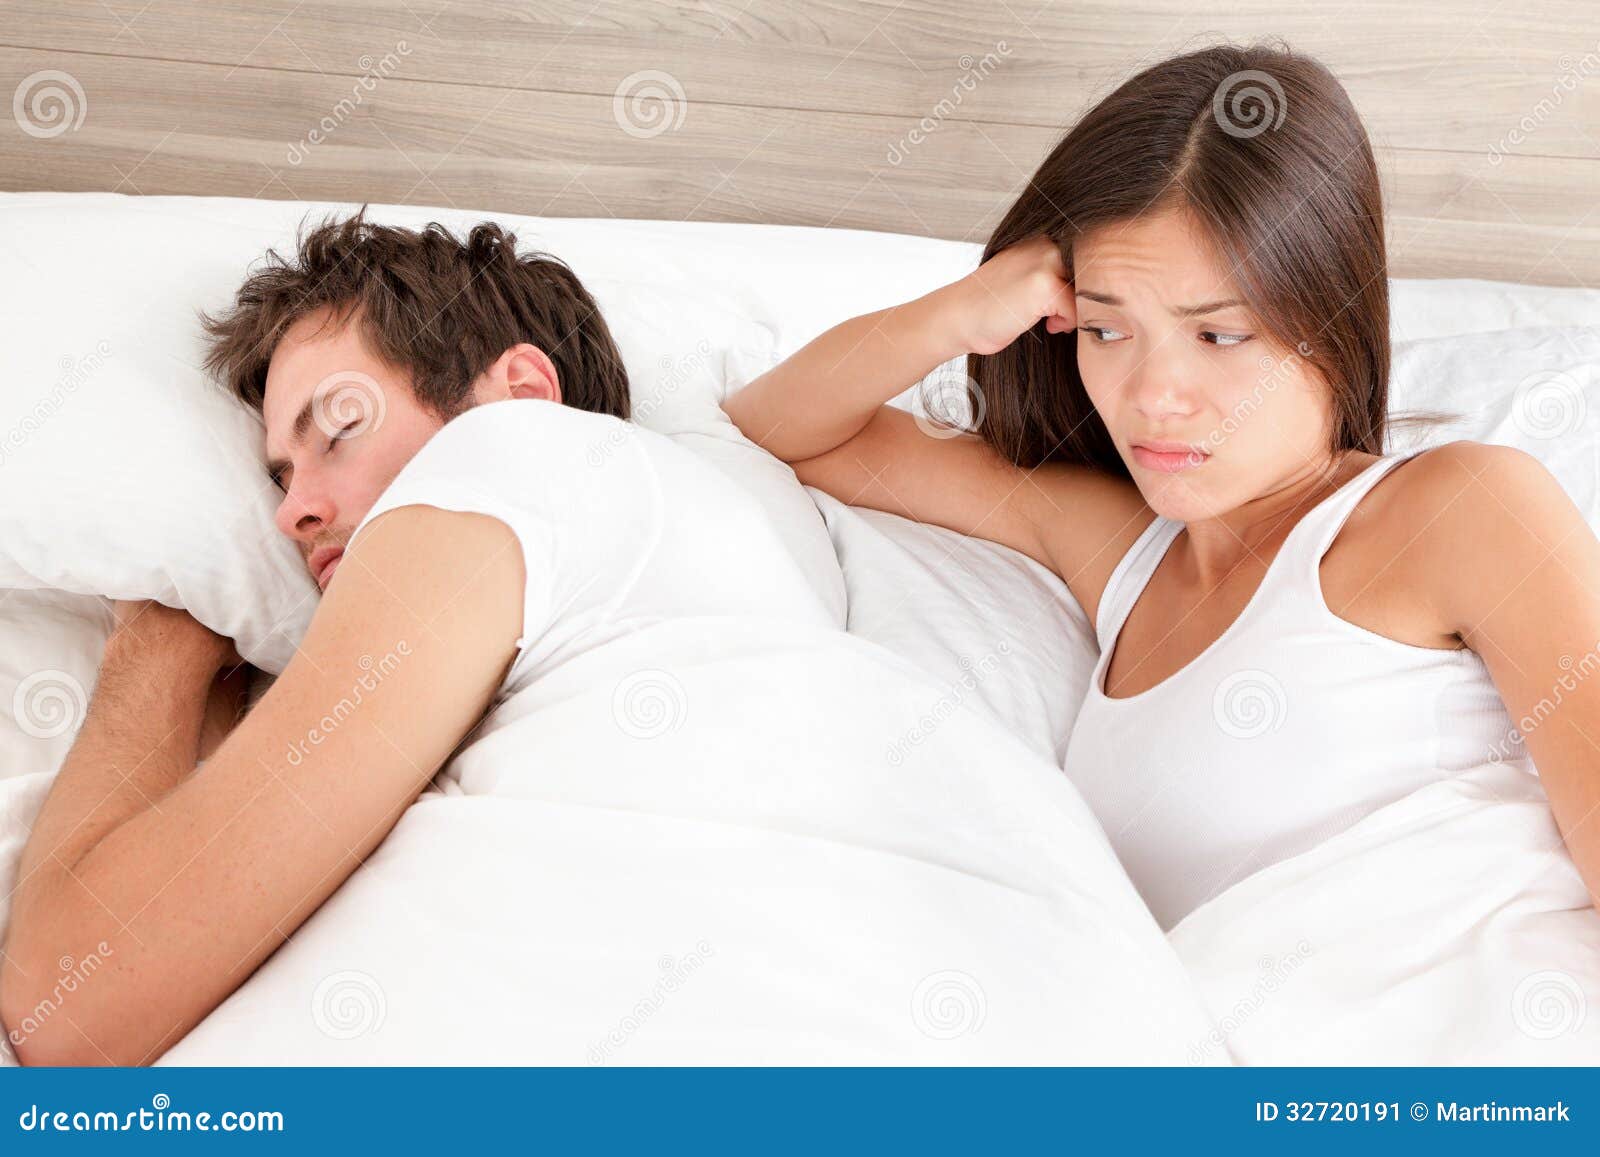 Marriage Couple Marital Problems in Bed Stock Image photo